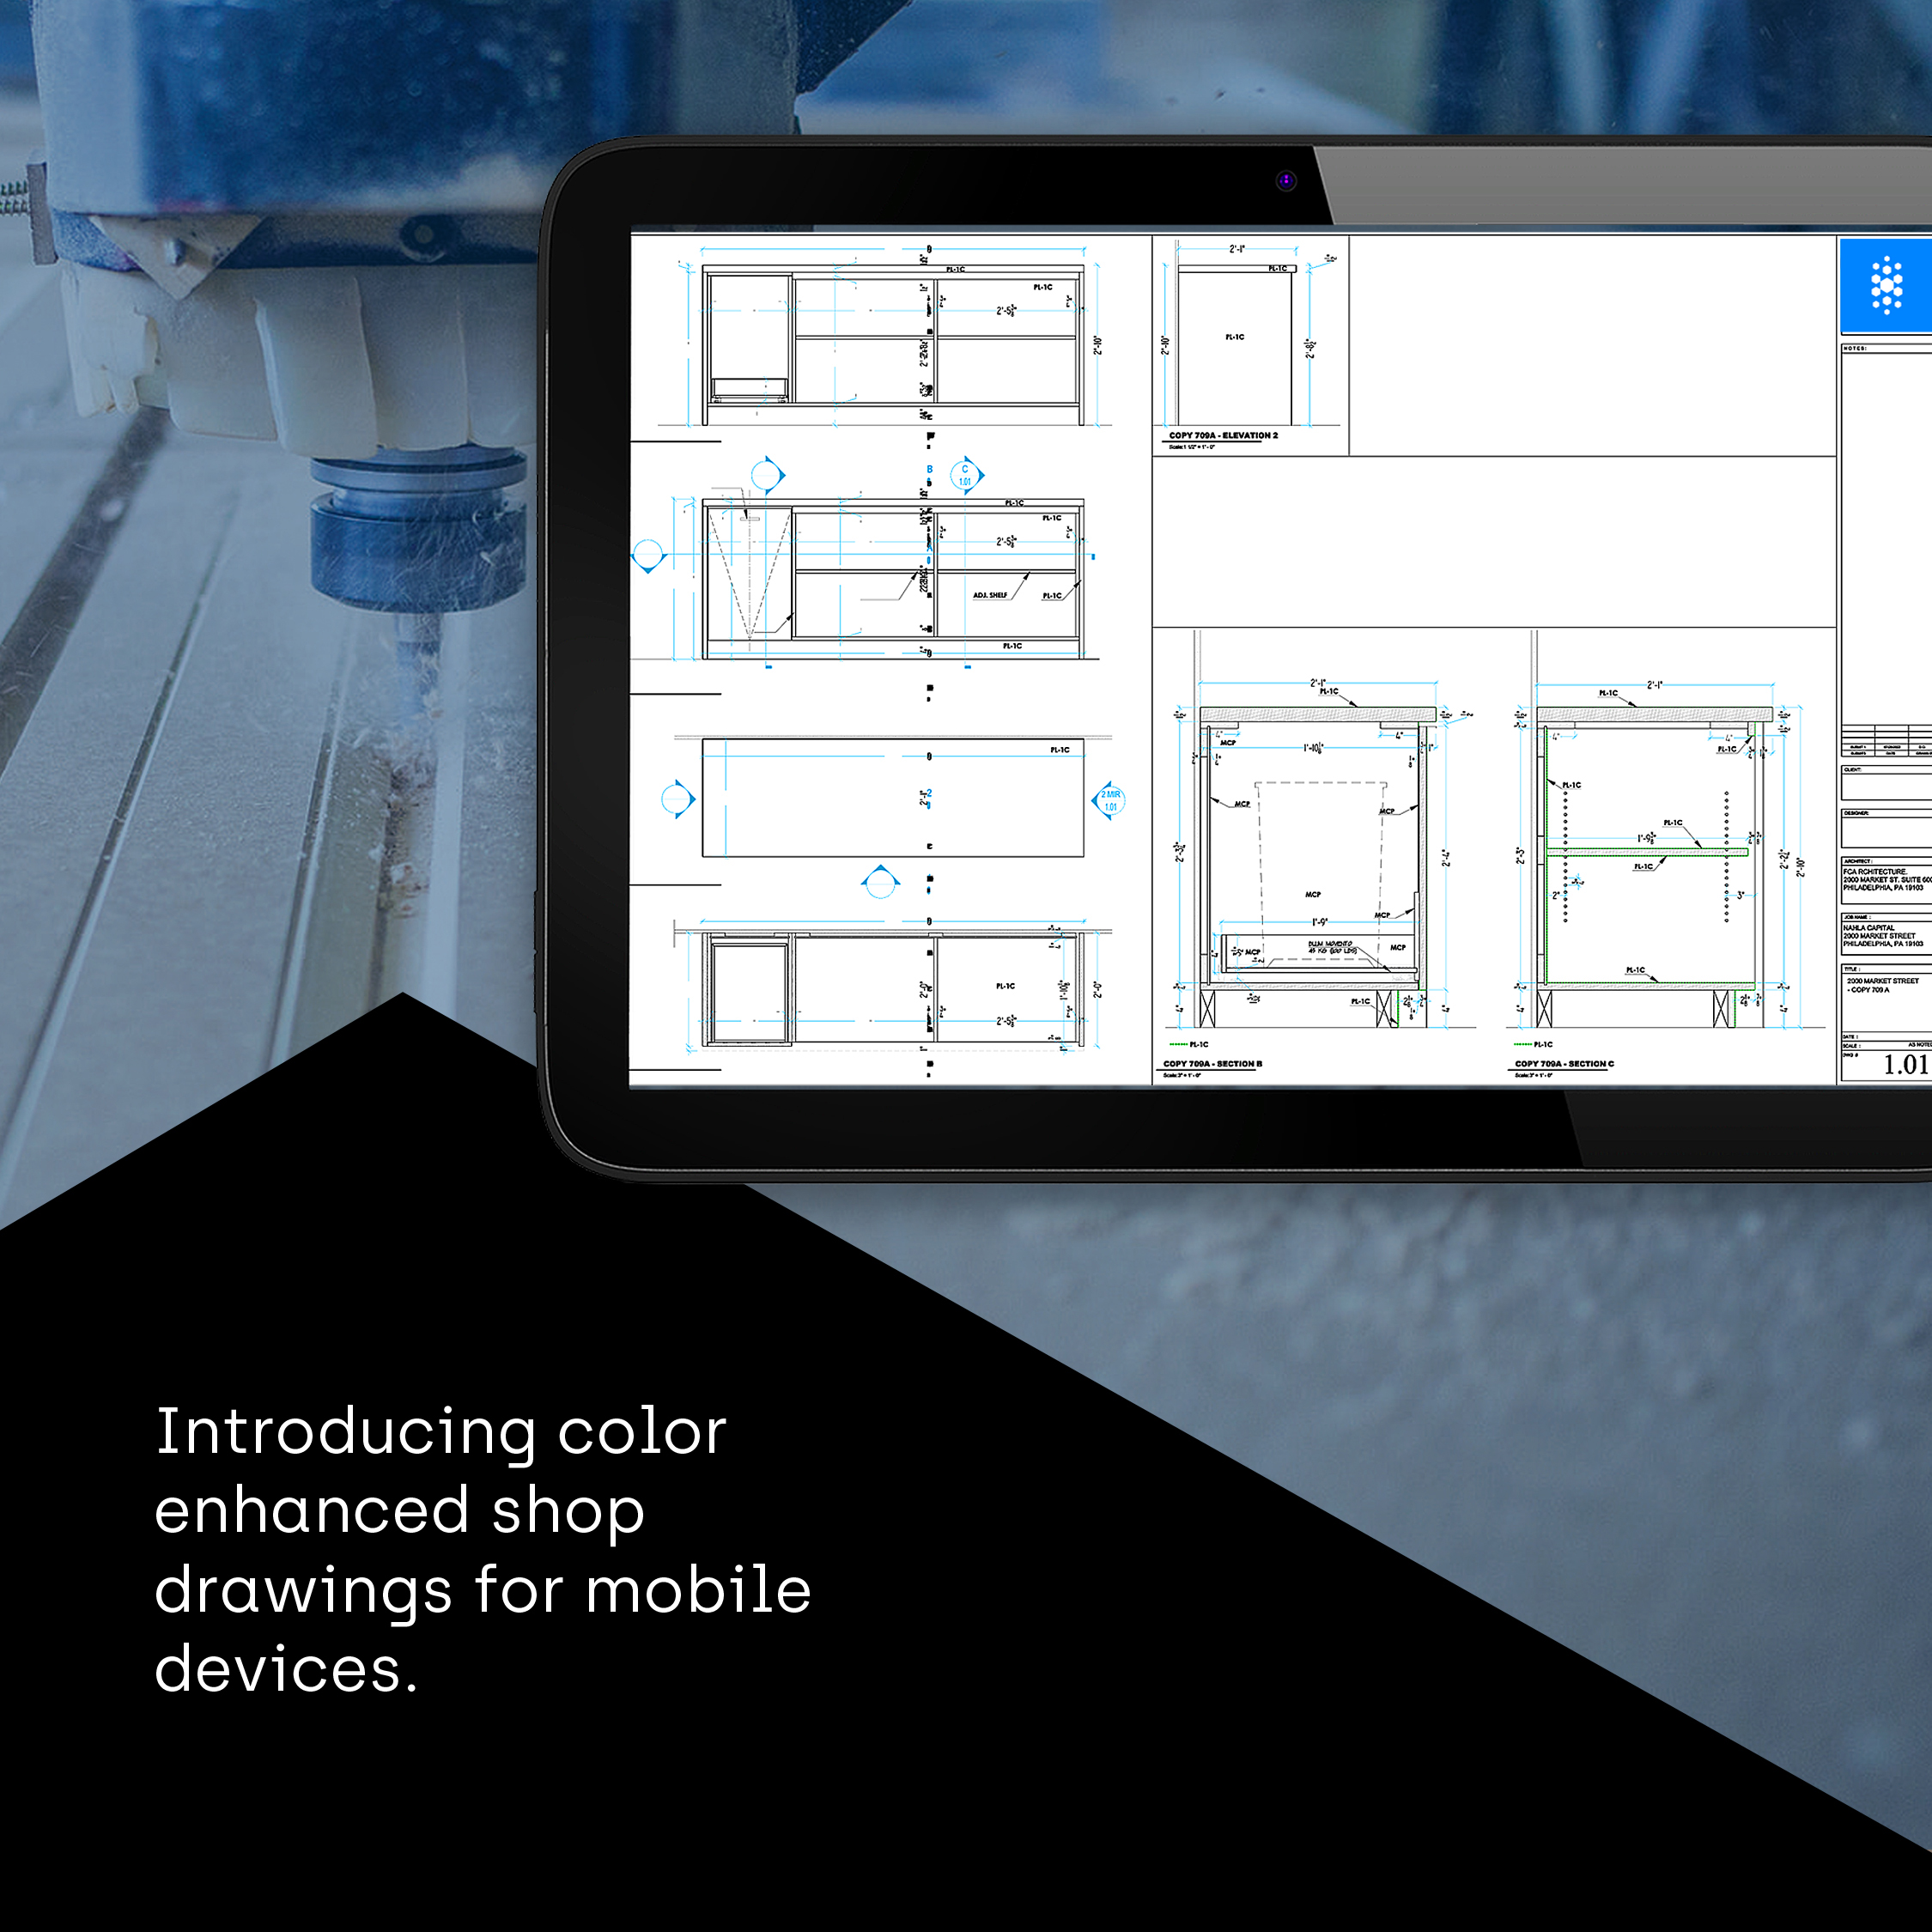 Introducing color enhanced millwork shop drawings for mobile devices.